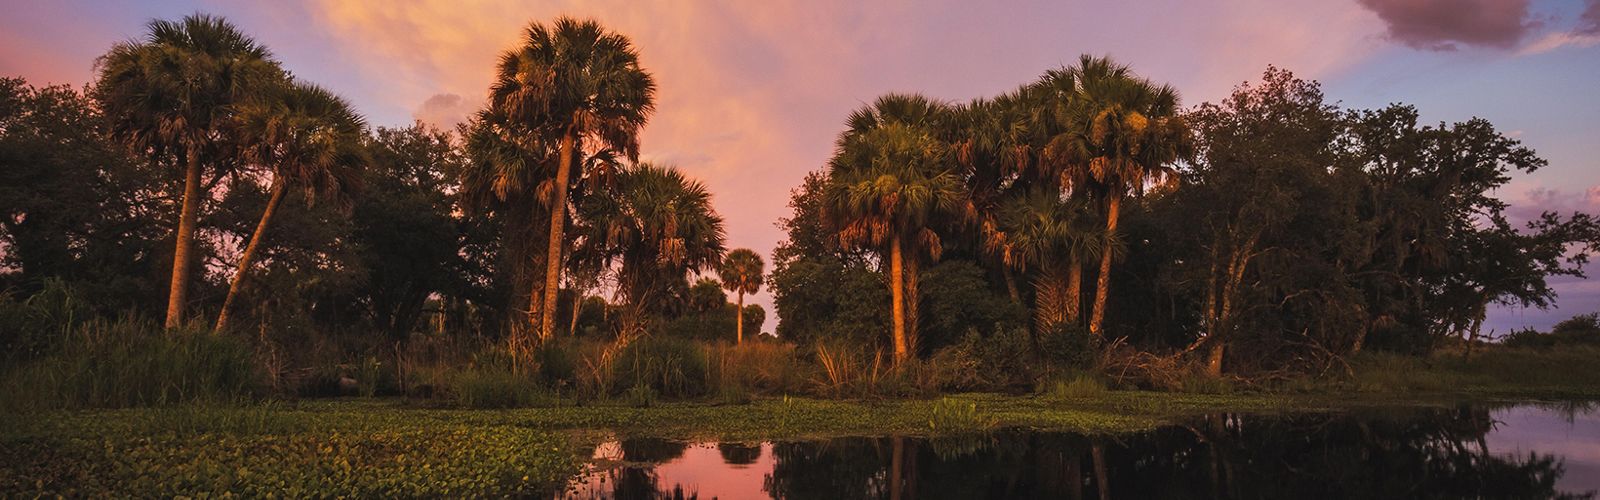 Sunsets over Florida ranchland with palms and a pond.